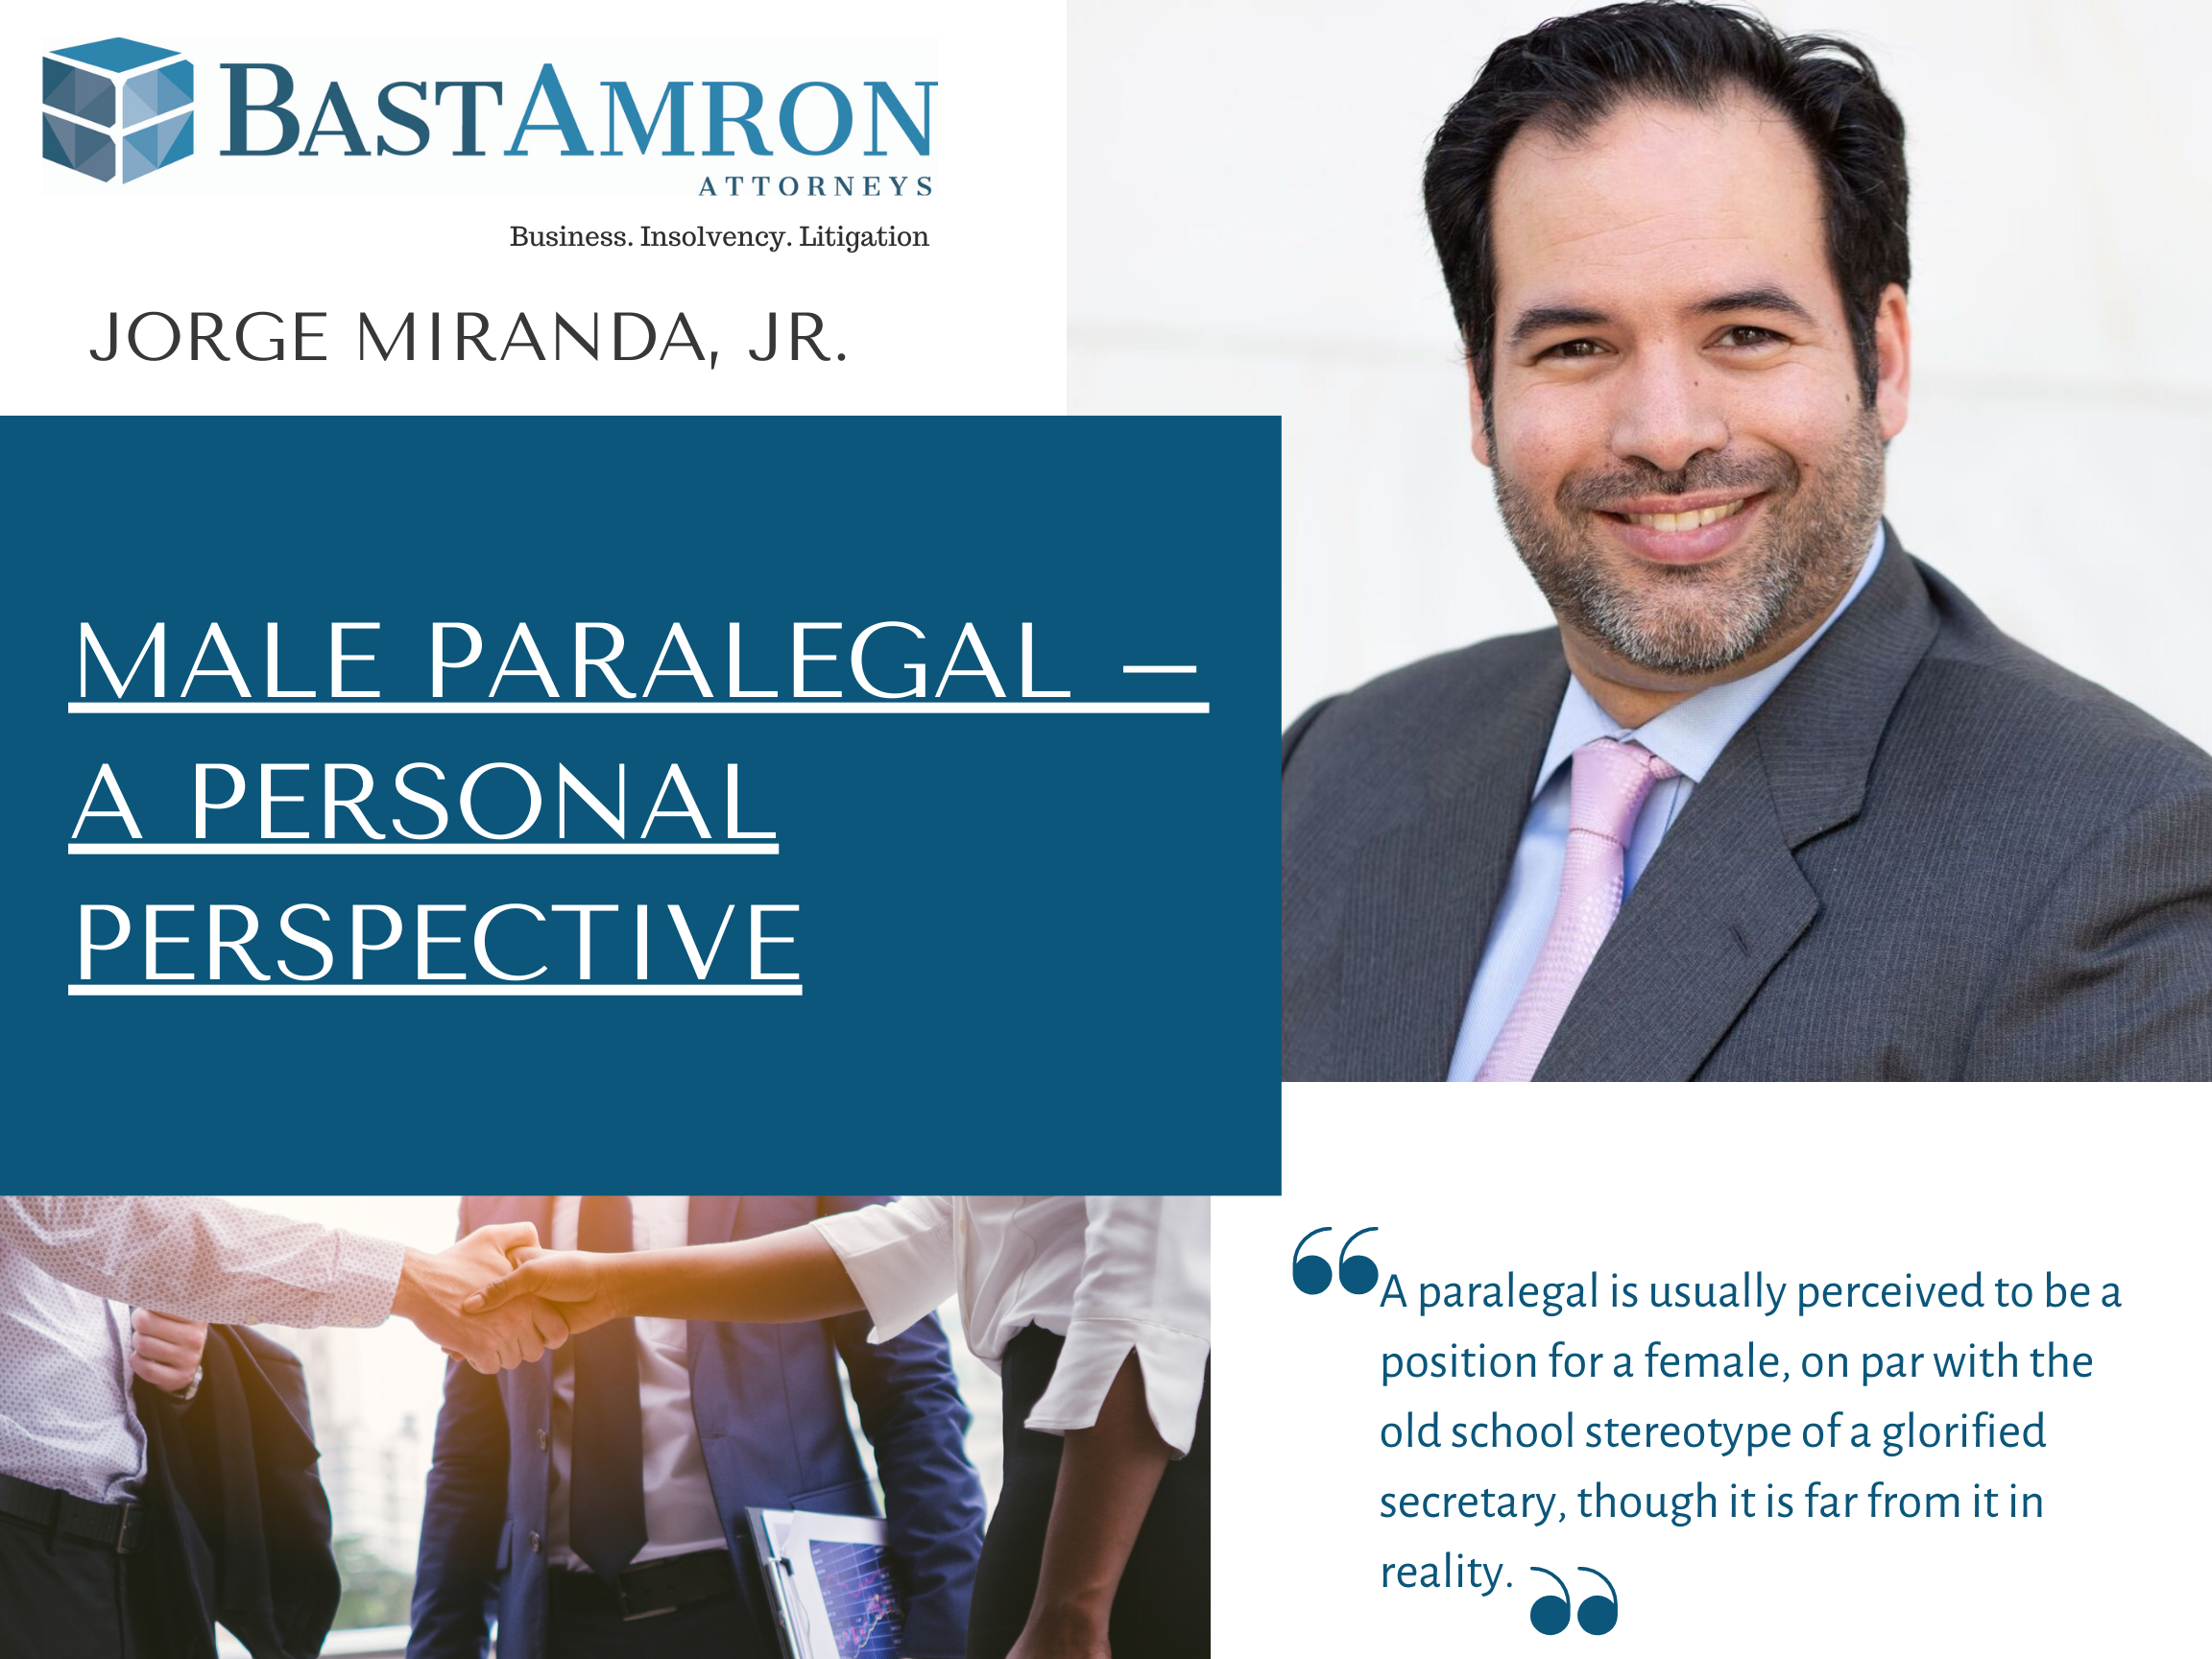 MALE PARALEGAL – A PERSONAL PERSPECTIVE